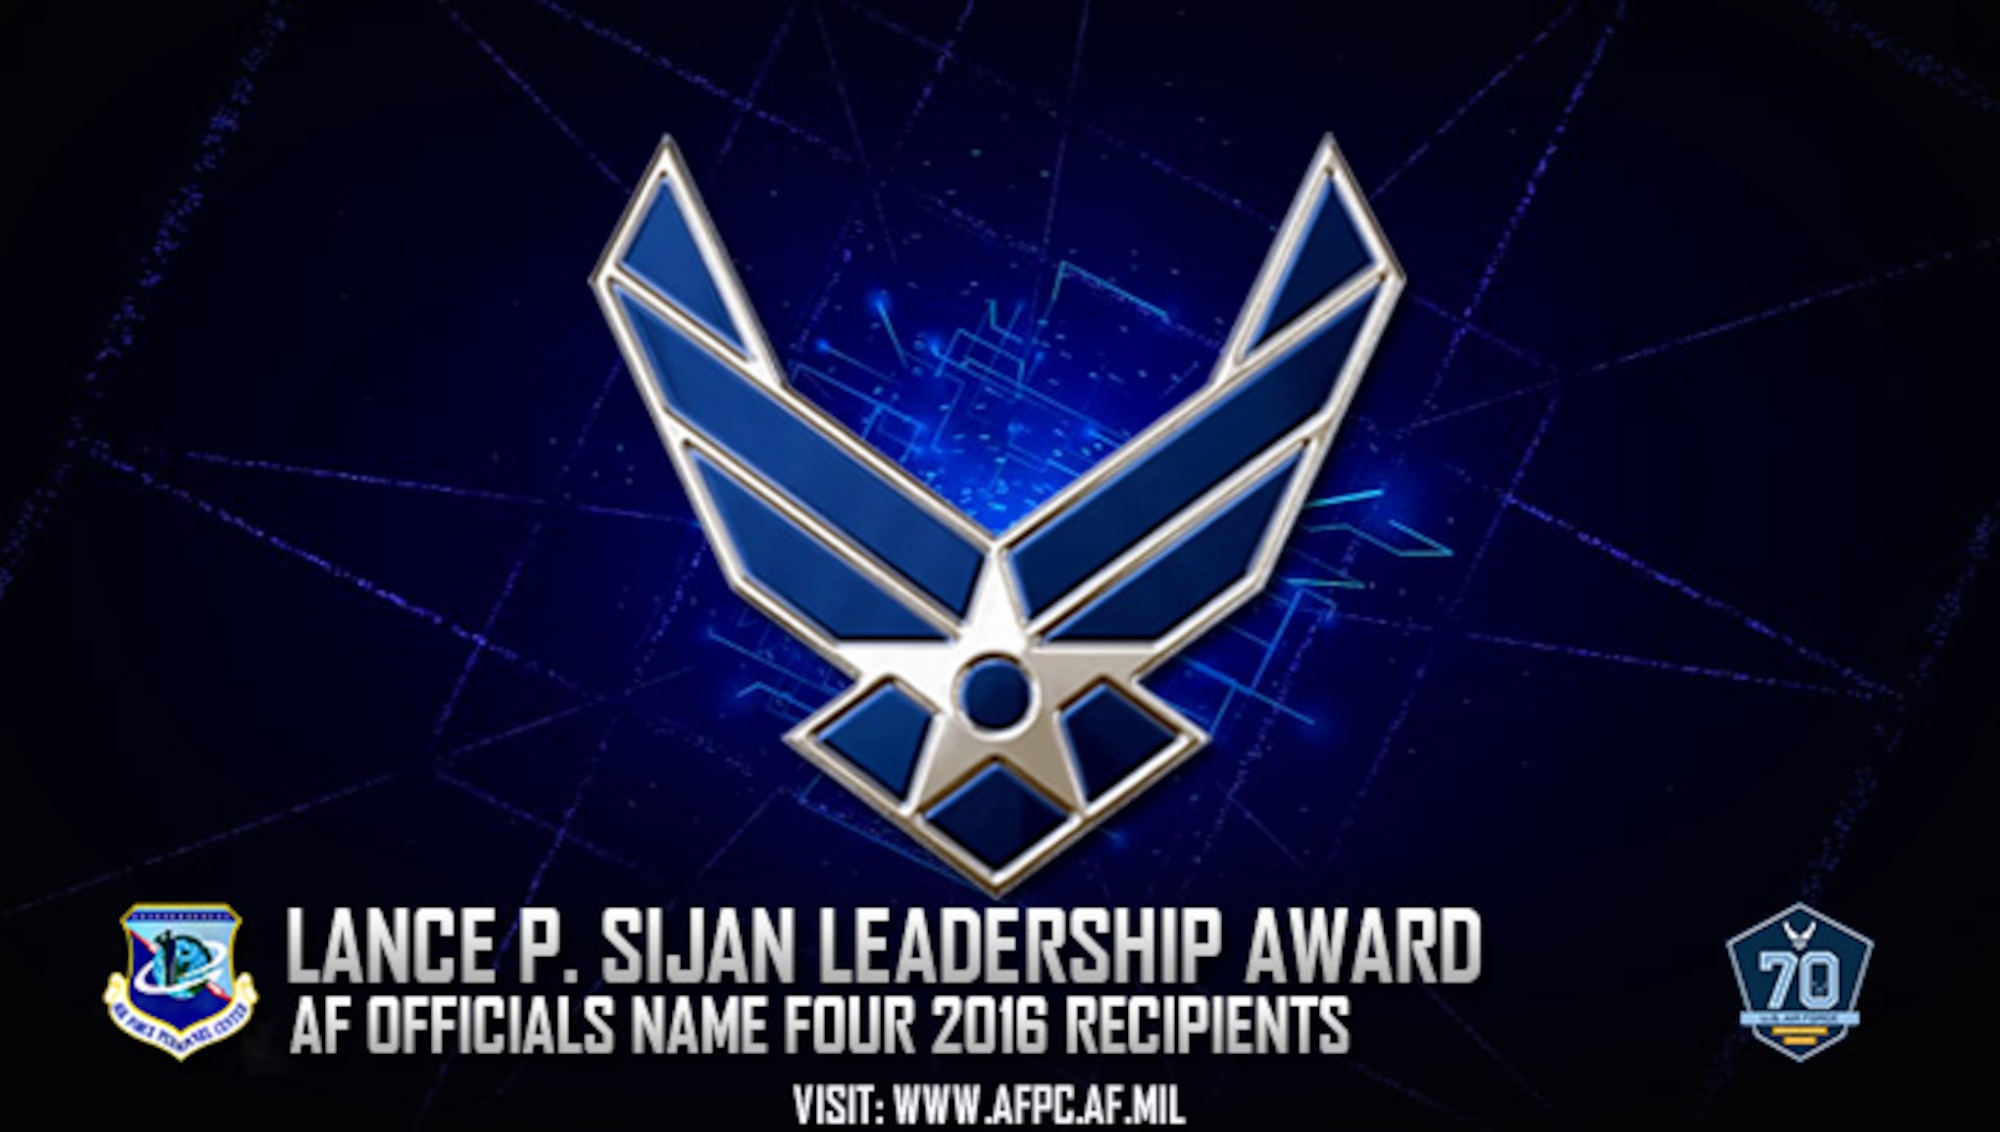 Air Force officials have named four Airmen as the 2016 Lance P. Sijan Leadership Award winners. The award was first presented in 1981 and was named in honor of the first U.S. Air Force Academy graduate to receive the Medal of Honor. (U.S. Air Force graphic by Staff Sgt. Alexx Pons)